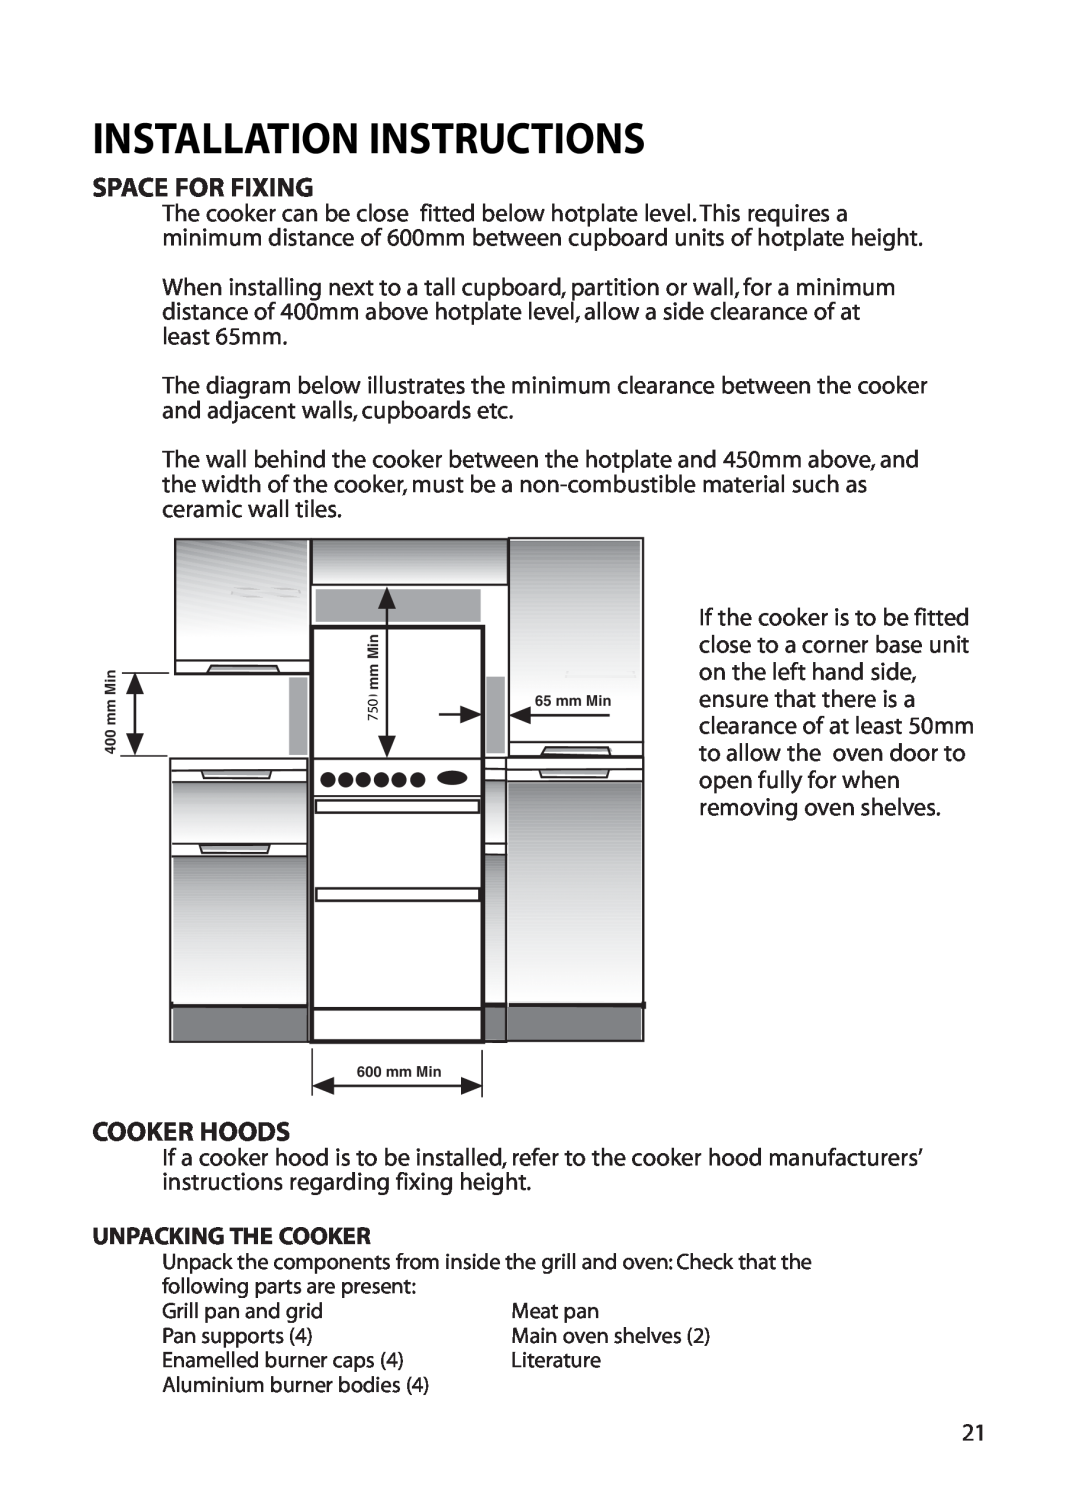 Hotpoint EG52 installation instructions Space For Fixing, Cooker Hoods, Unpacking The Cooker, Installation Instructions 